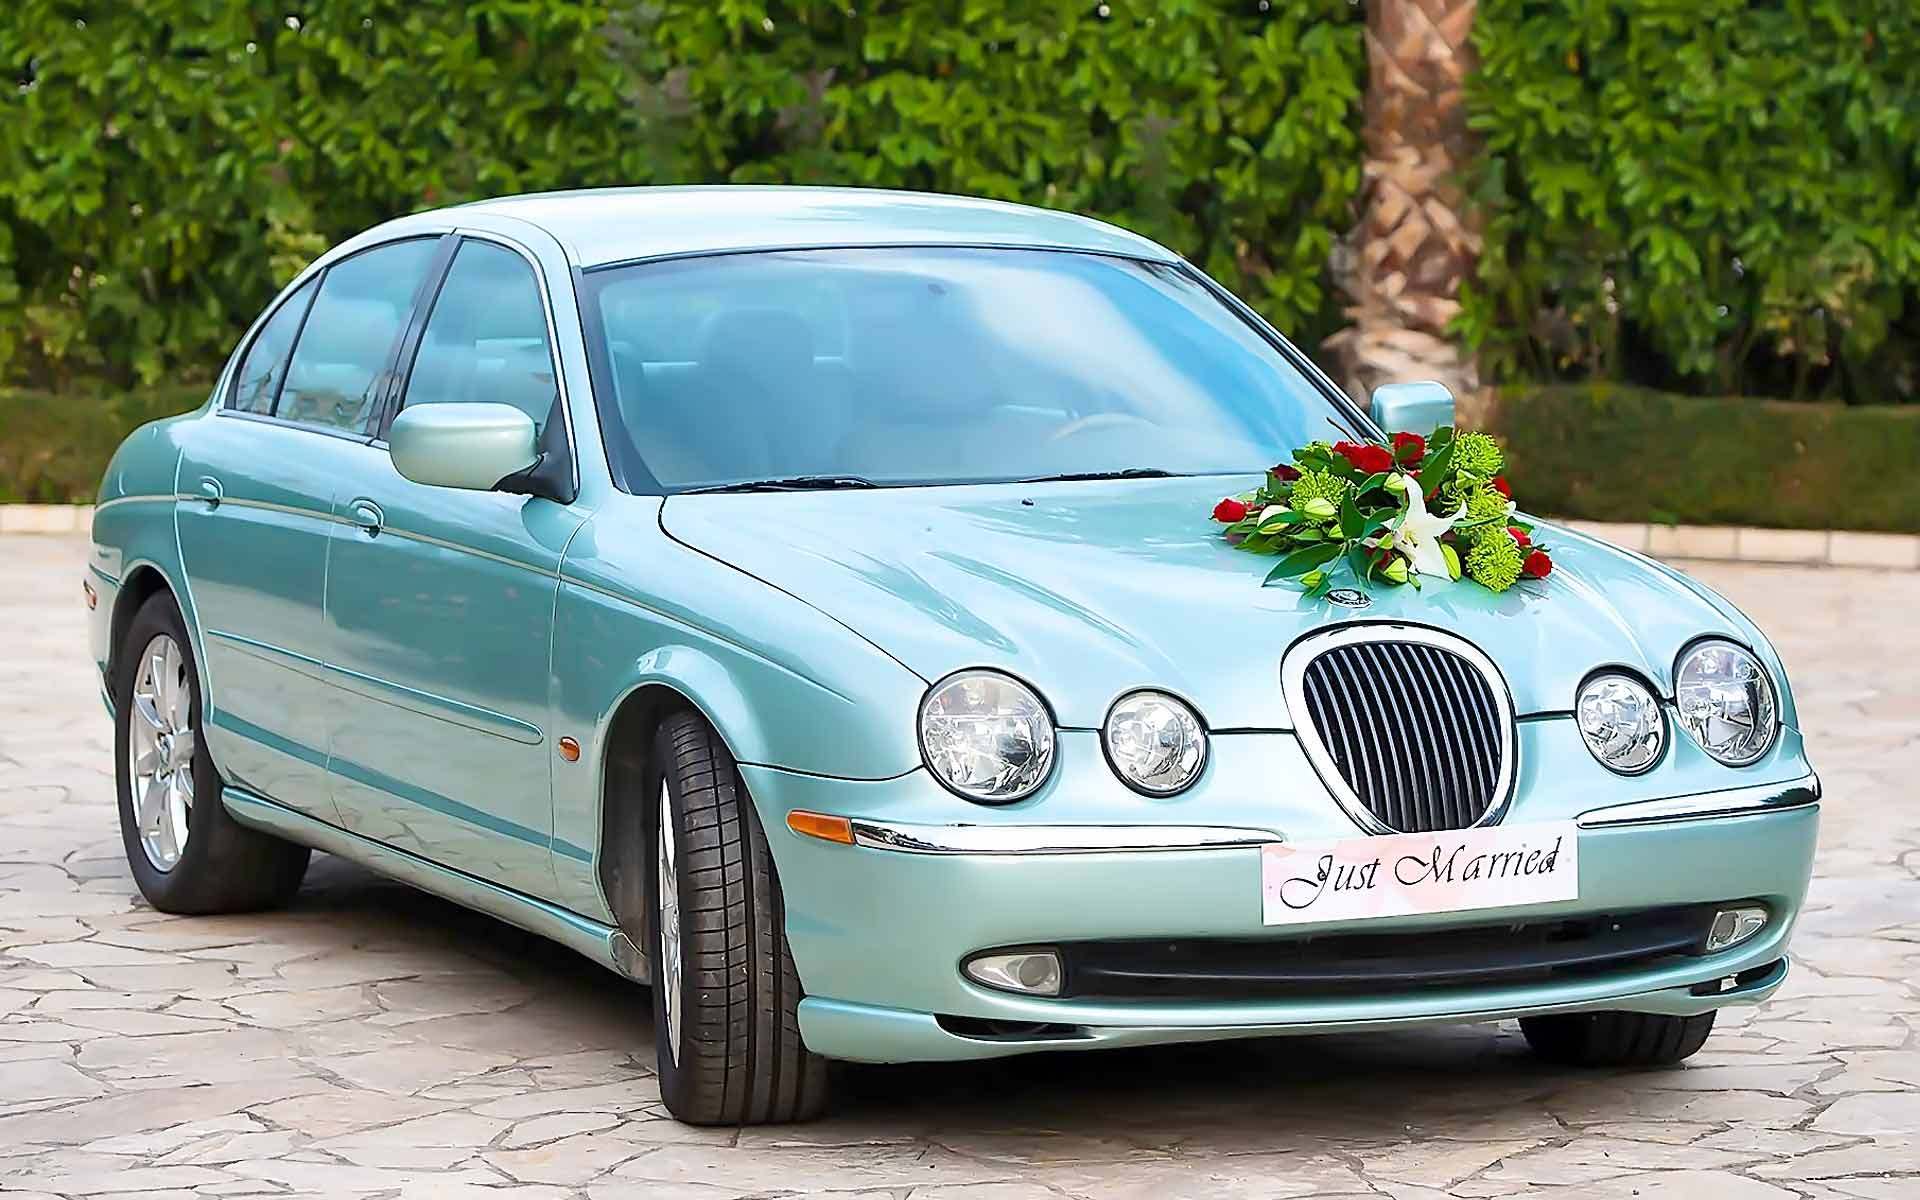 A-Classic-Wedding-Cars-Is-This-S-Type-Jaguar-by-Diamond-Events